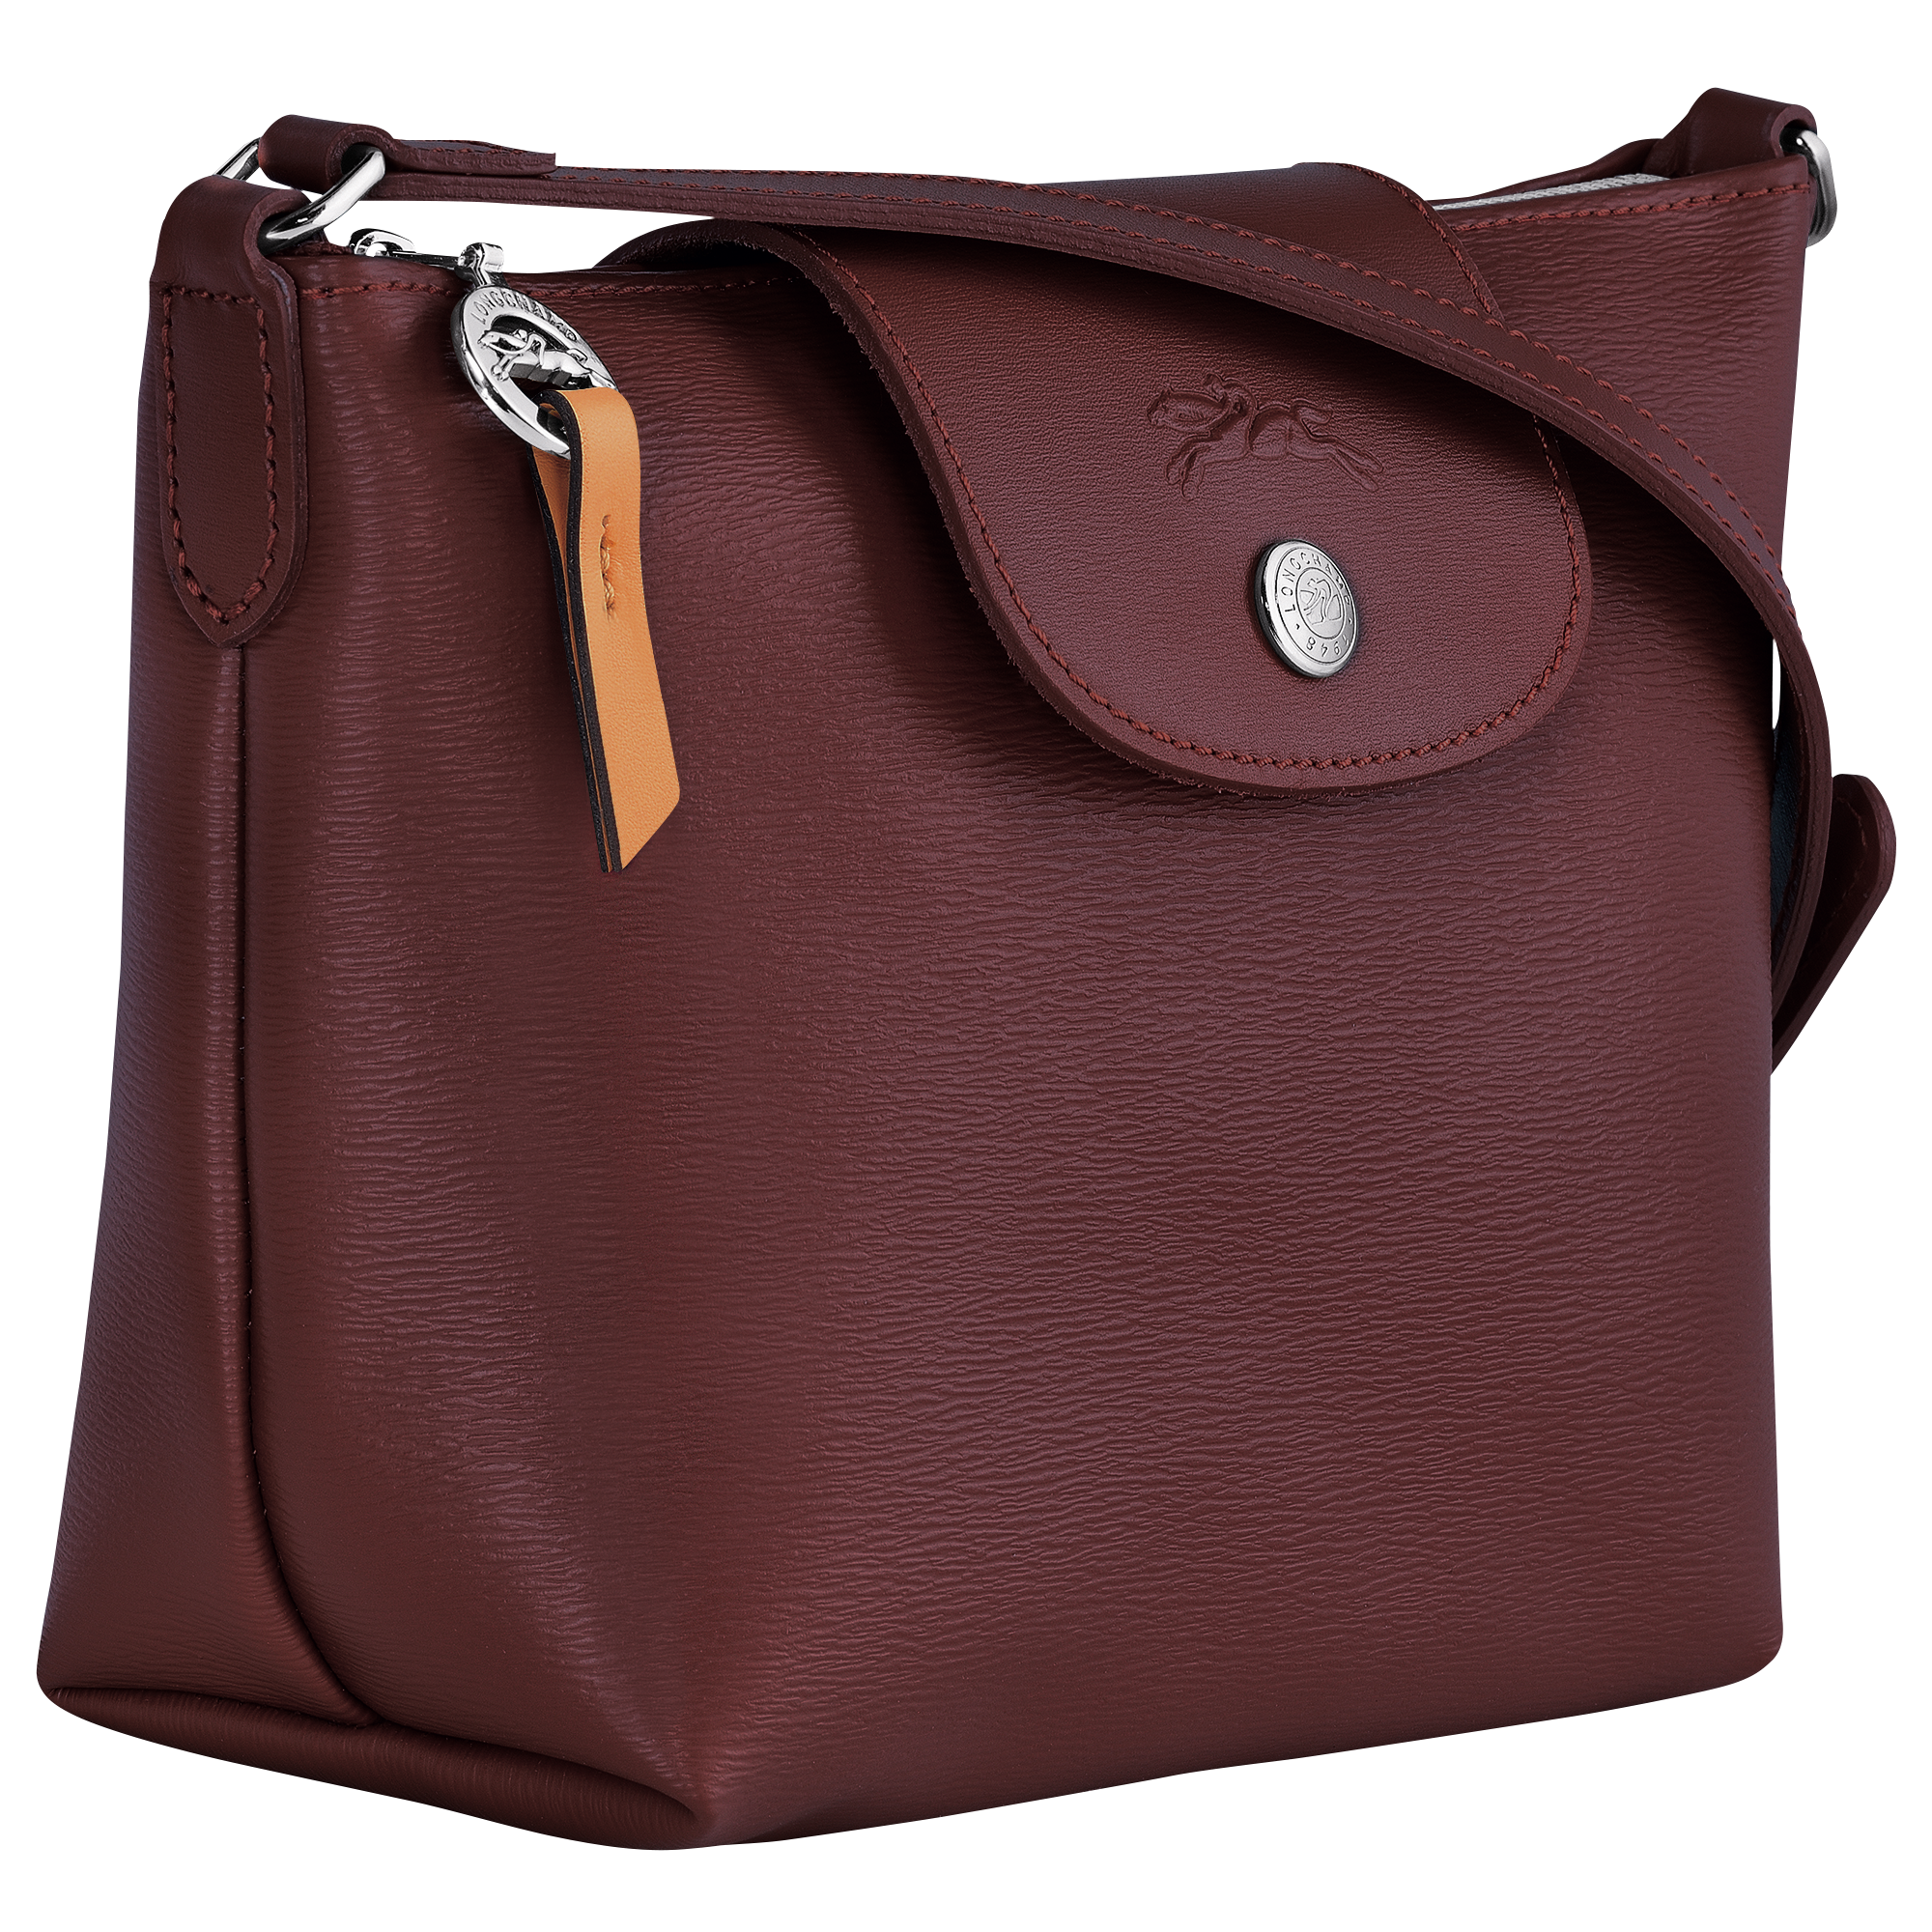 Urban Ladies - The Longchamp Le Pliage Filet bag from the